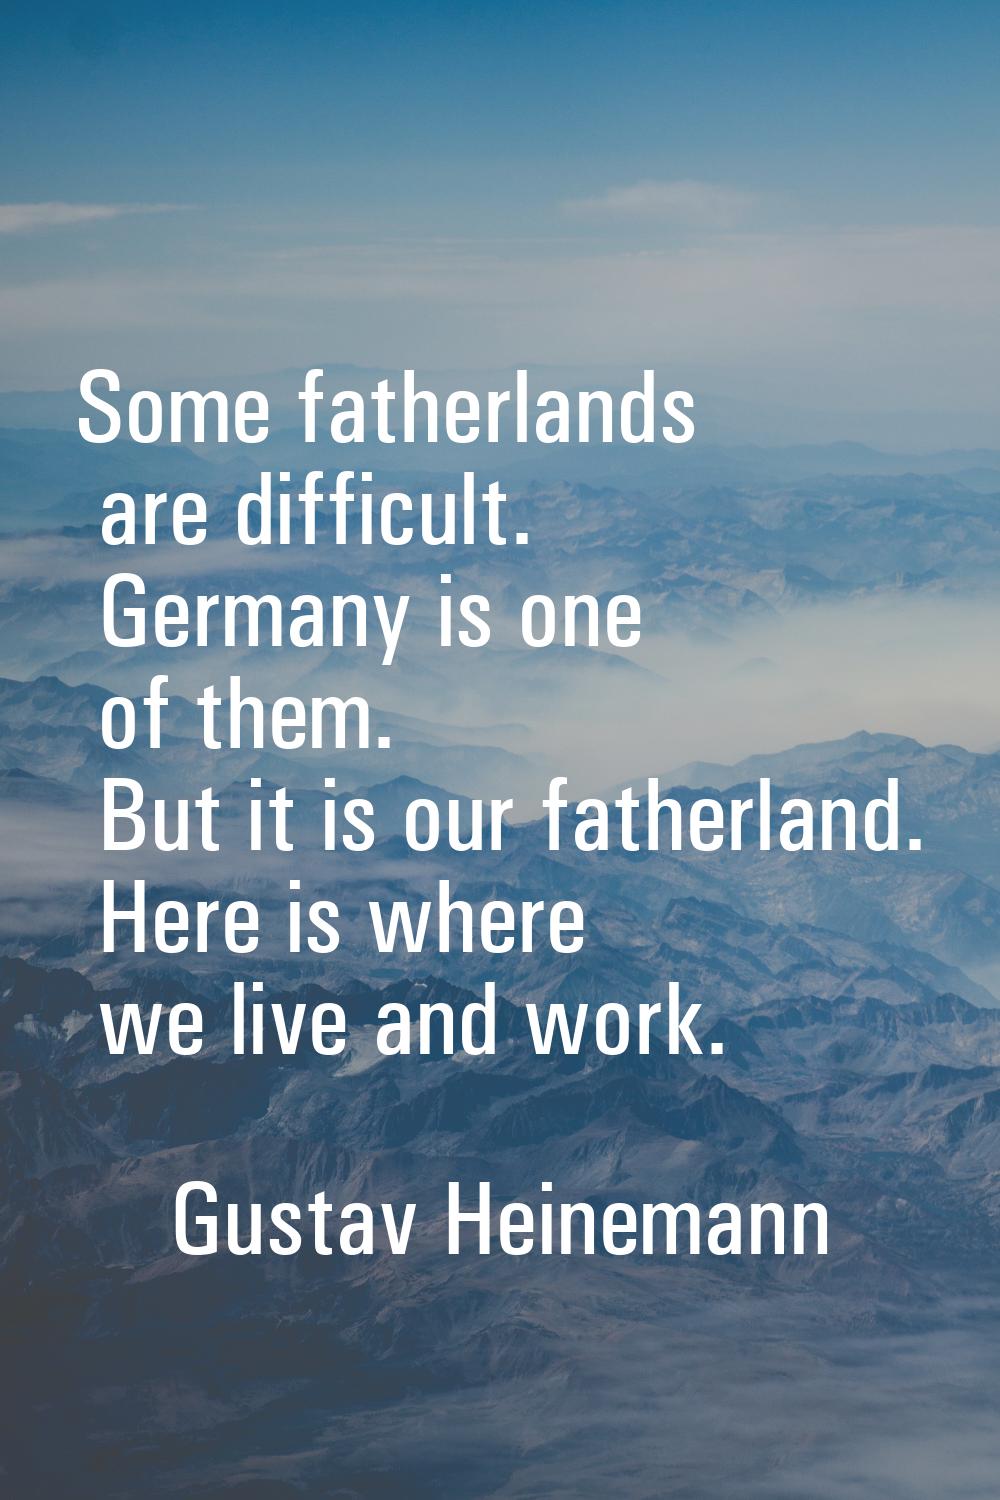 Some fatherlands are difficult. Germany is one of them. But it is our fatherland. Here is where we 